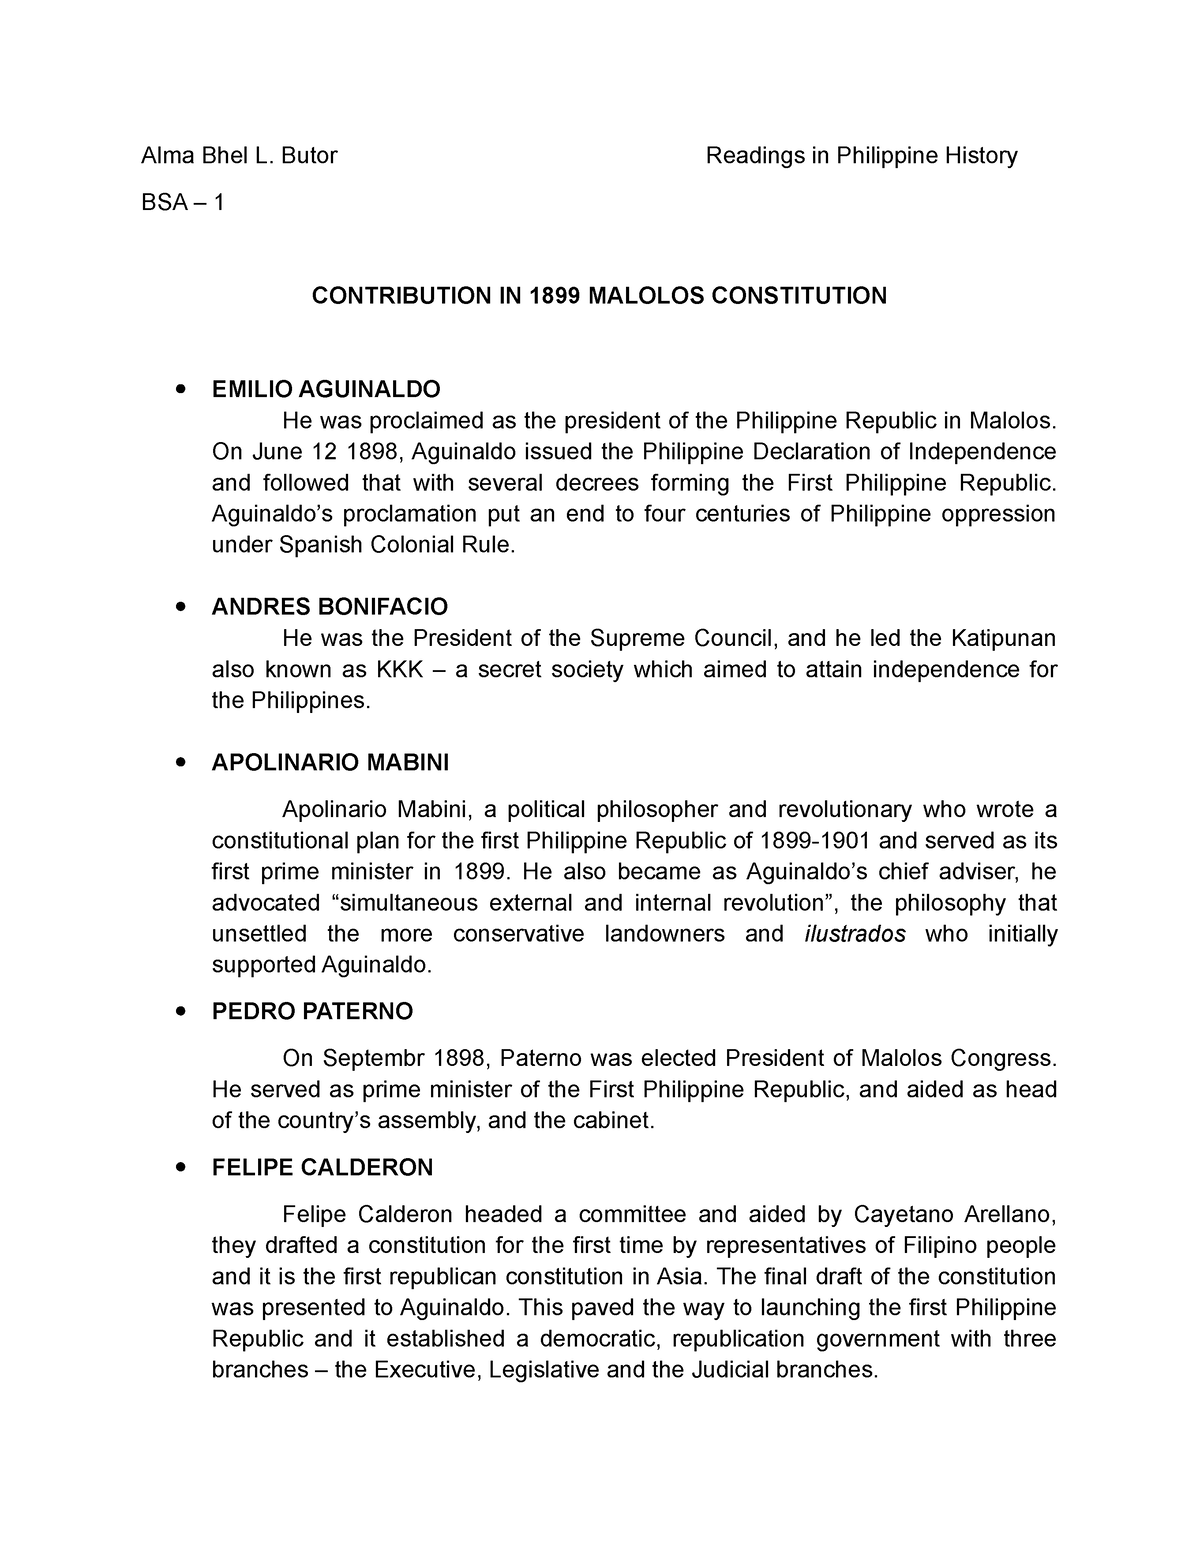 how does the malolos constitution define sovereignty essay